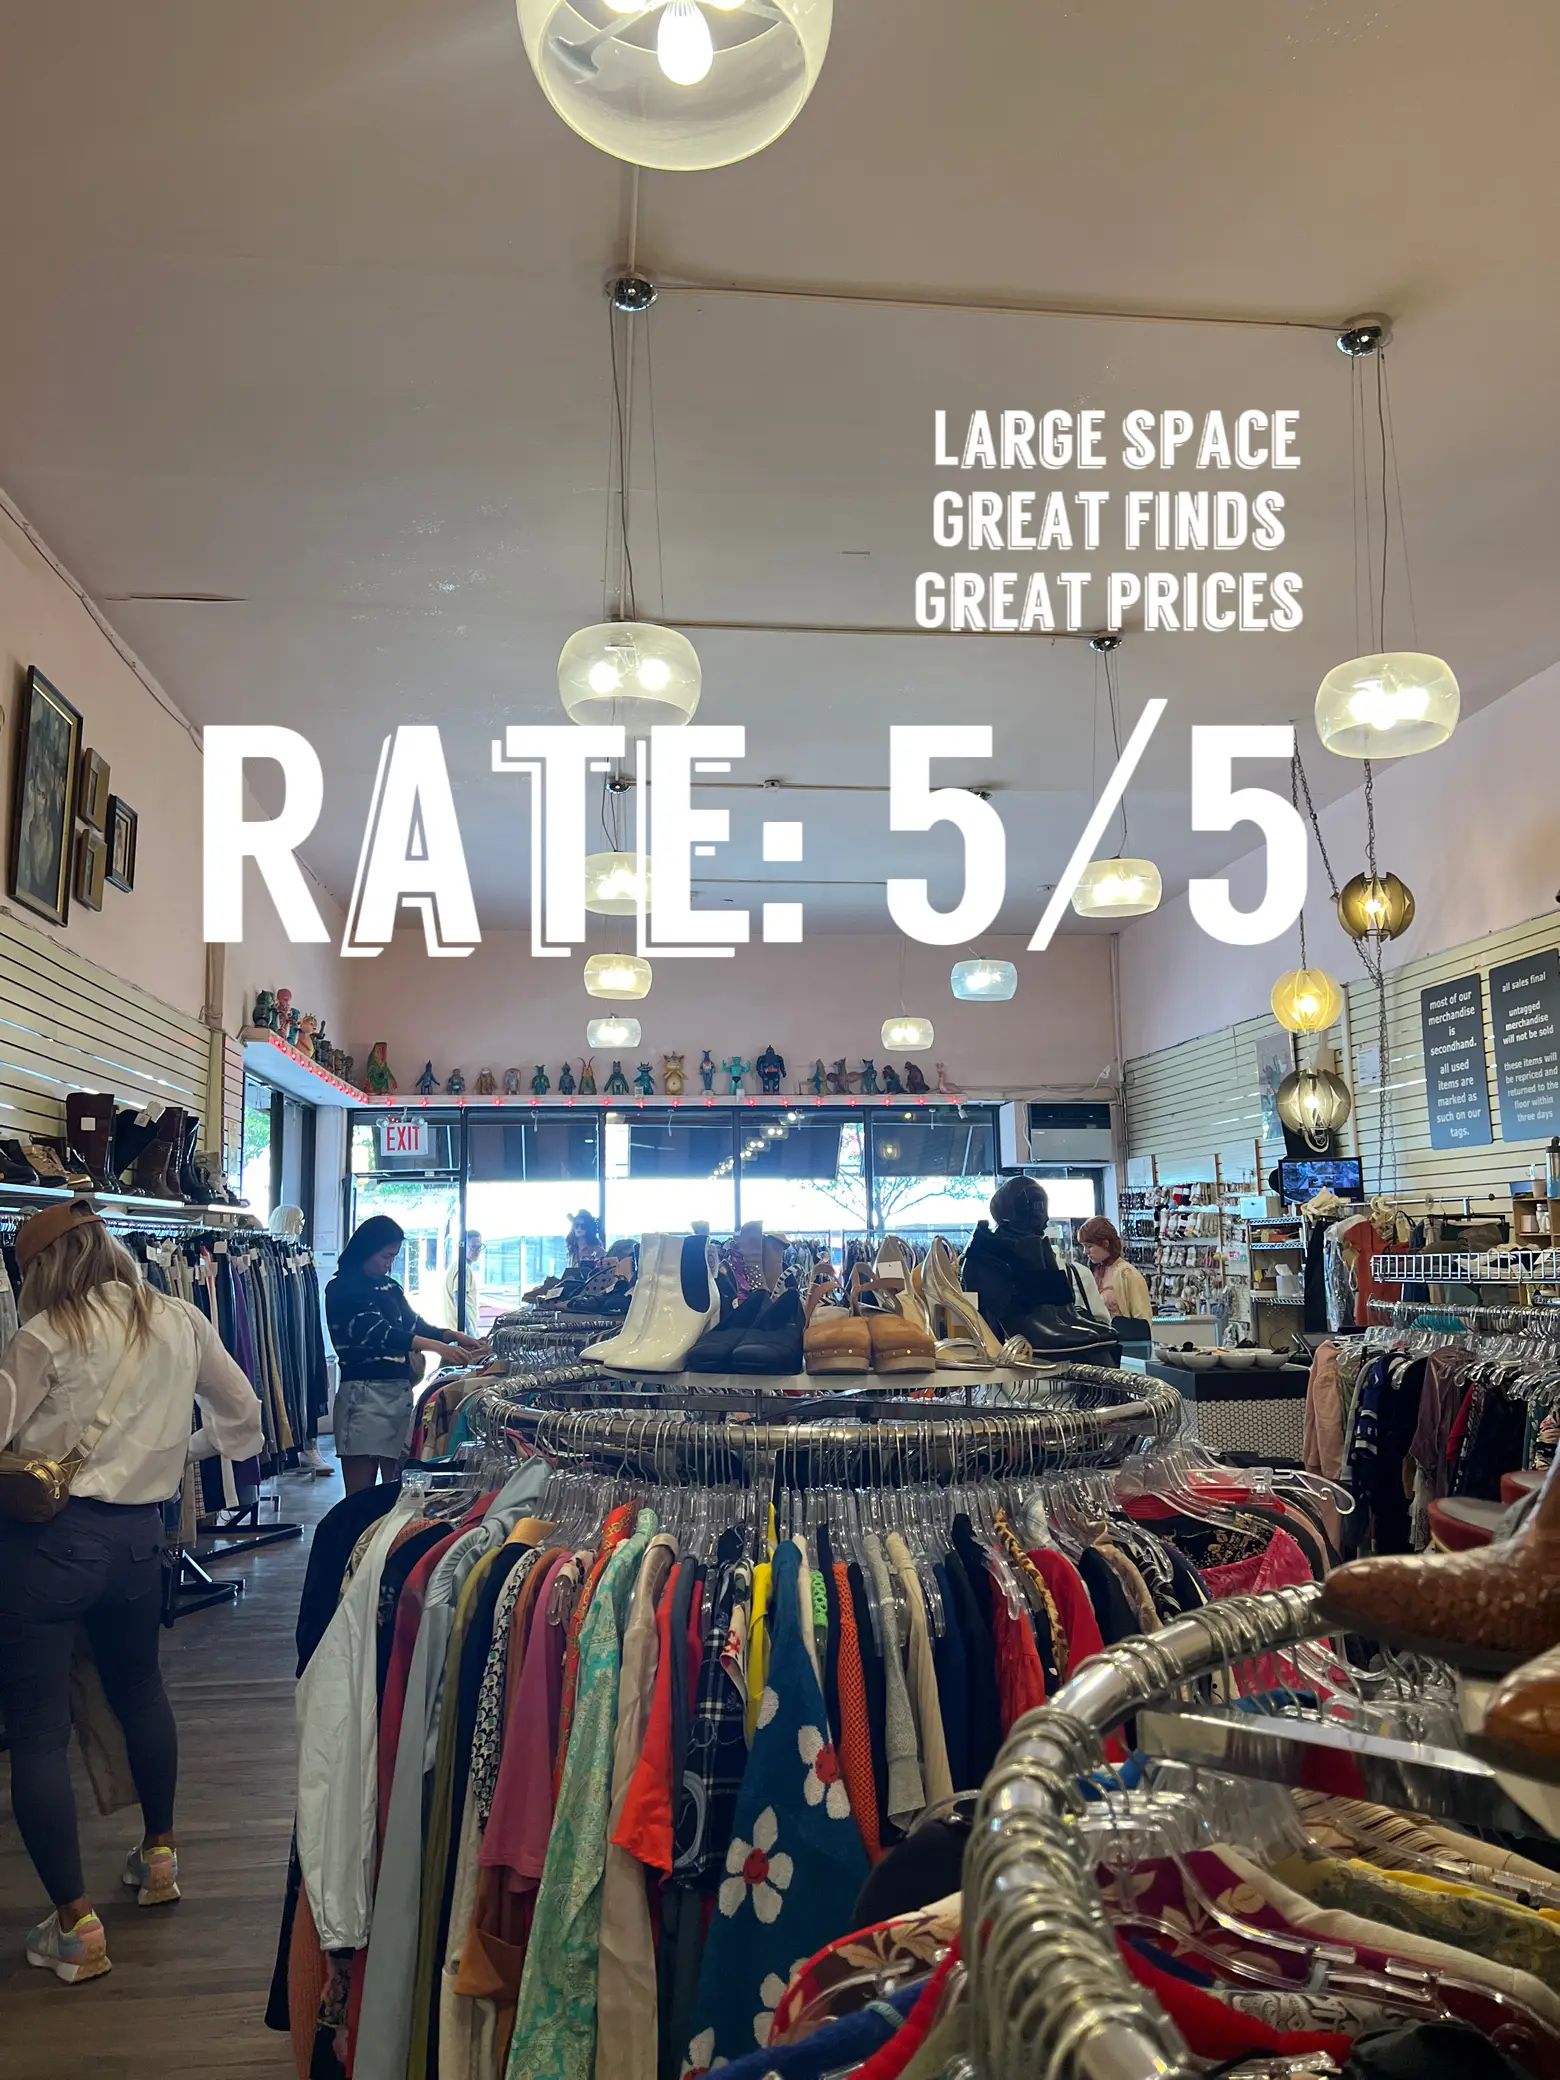 6 Awesome Vintage & Thrift Stores in Park Slope - Your Brooklyn Guide